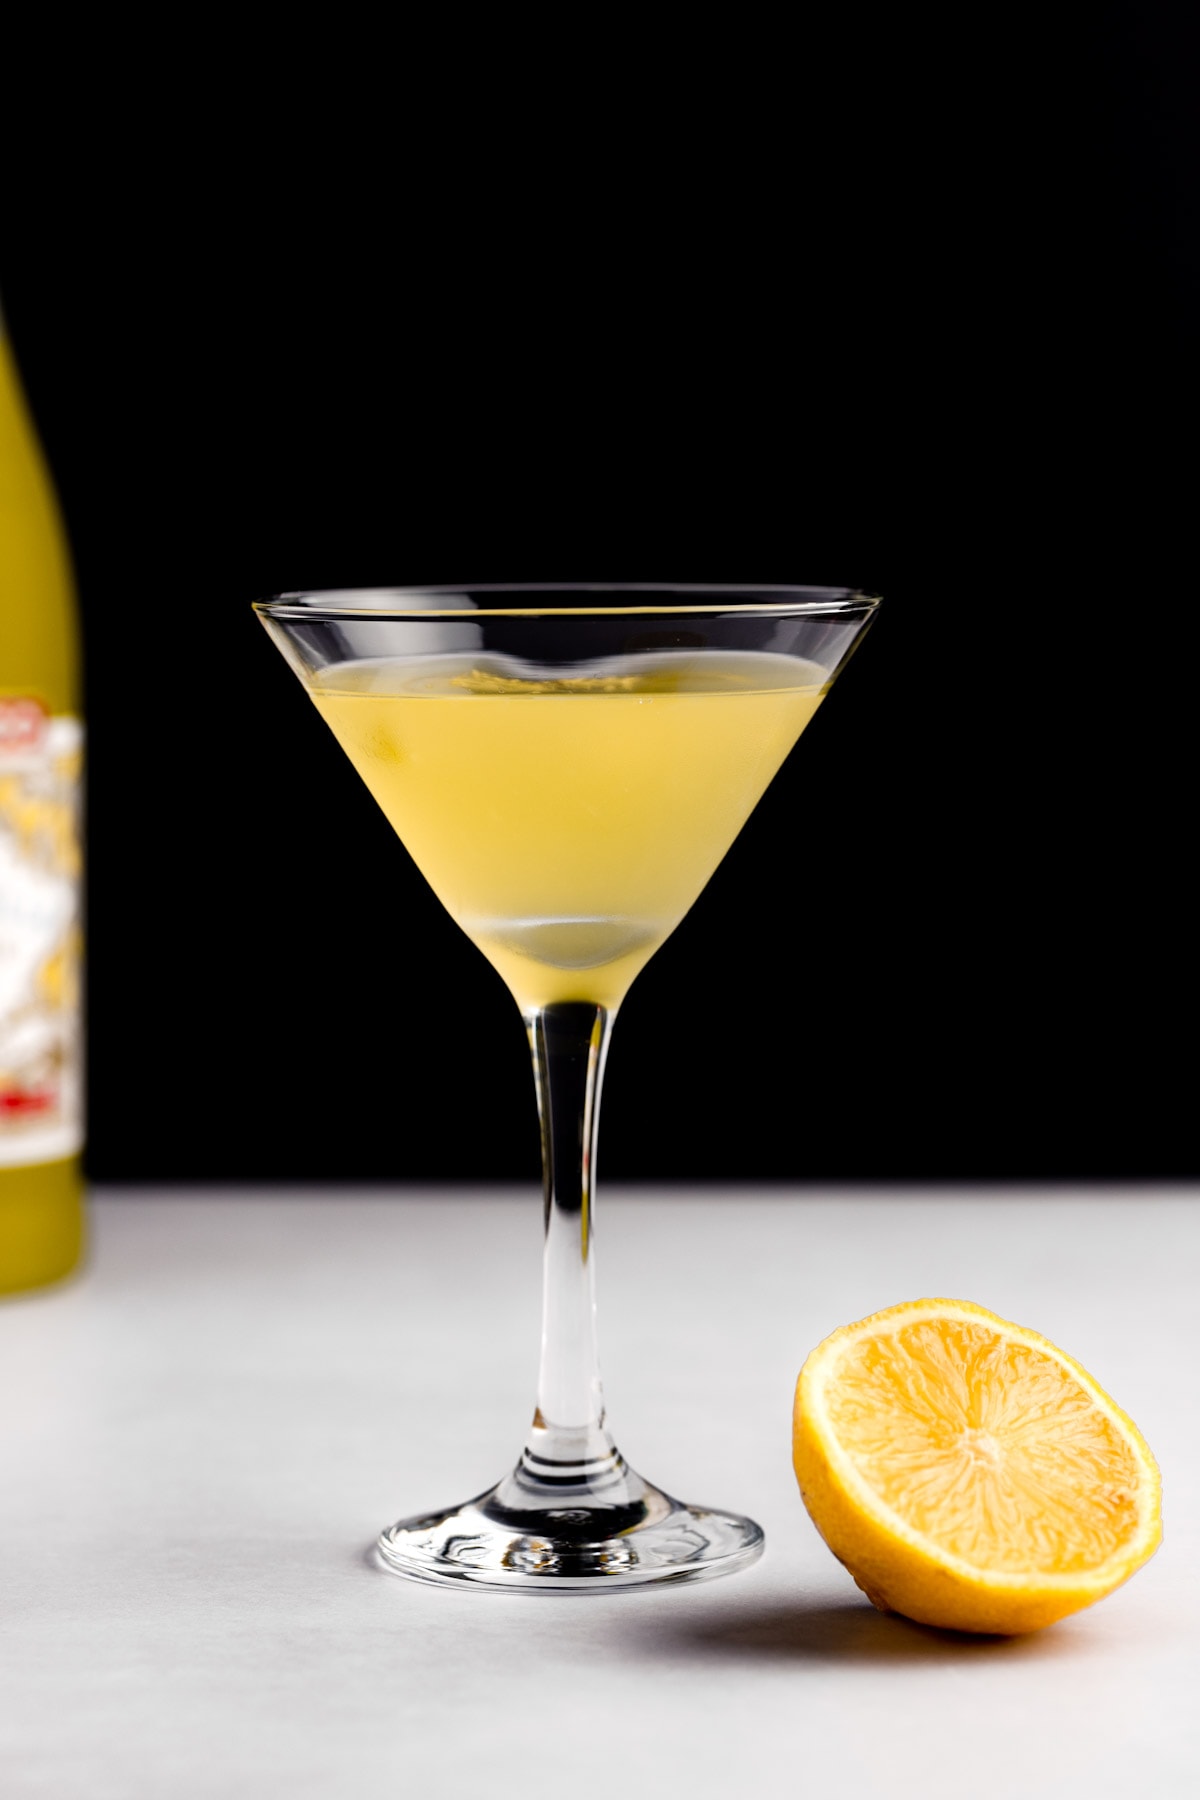 Eye level view of a limoncello martini, on a white table with a black background.